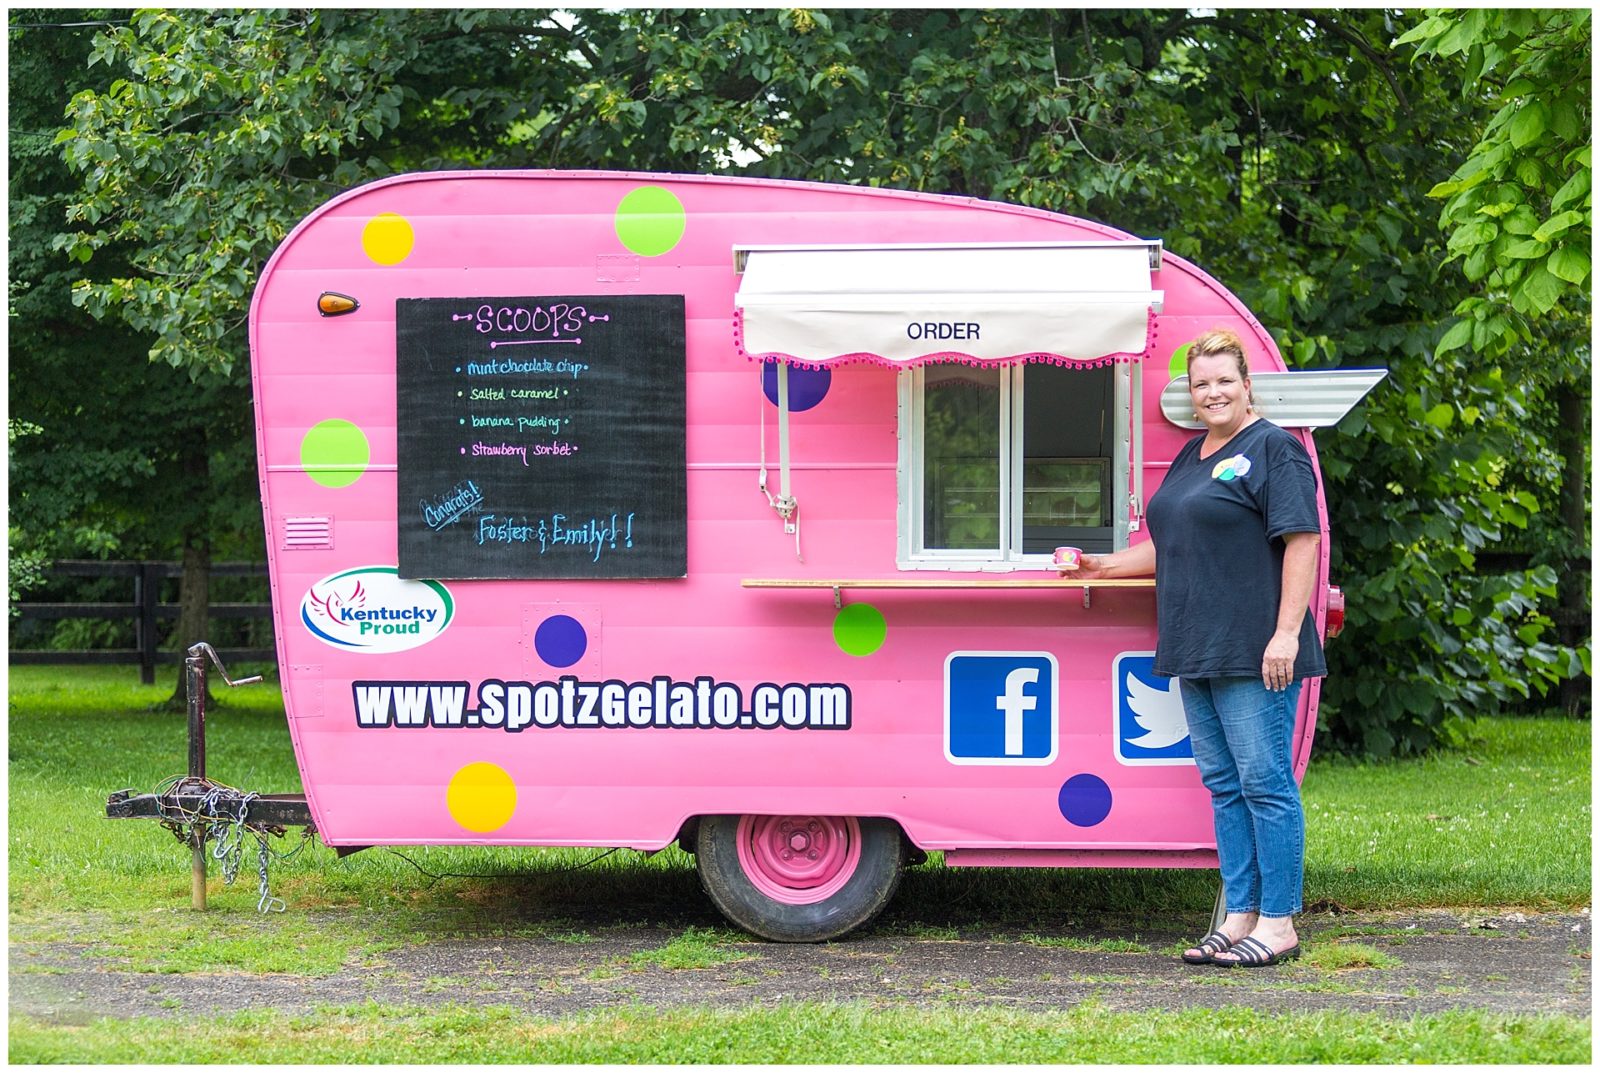 Beth Richardson owner of Spotz Gelato a charming vintage food truck that offers handcrafted small batch gelato and sorbet at weddings all over Kentucky. Photo by: Kevin and Anna Photography www.kevinandannaweddings.com